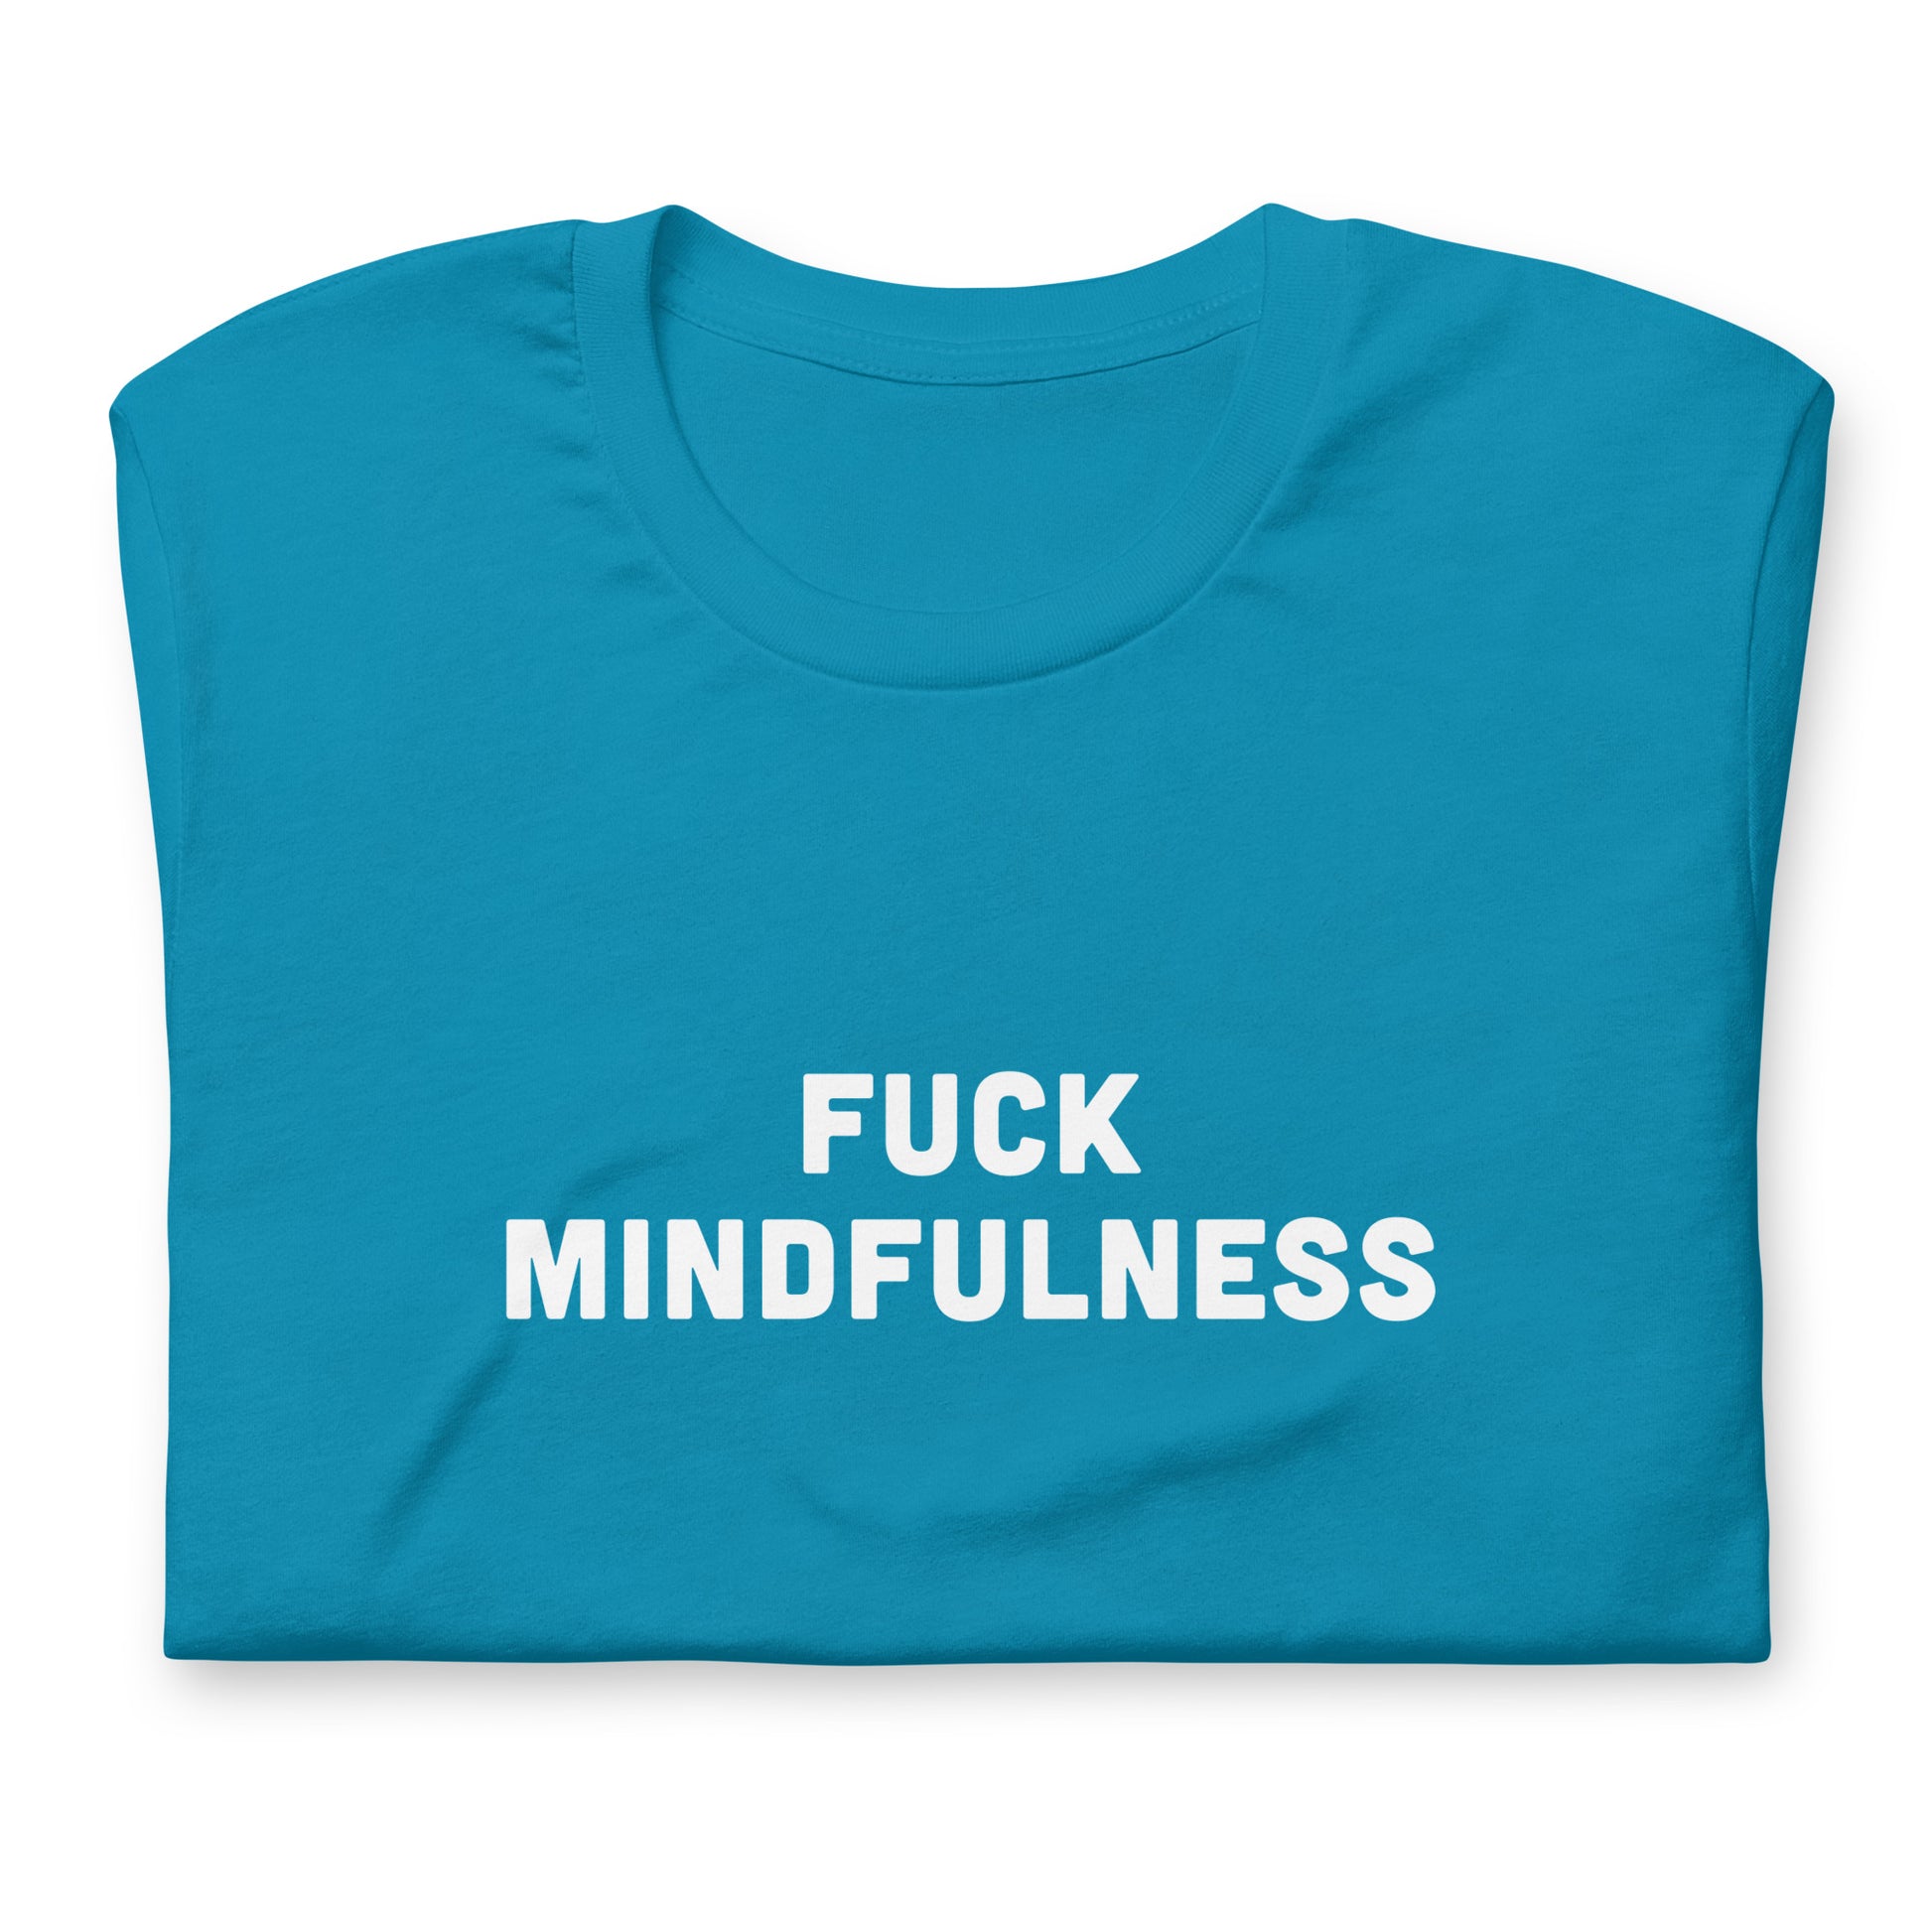 Fuck Mindfulness T-Shirt Size XL Color Navy